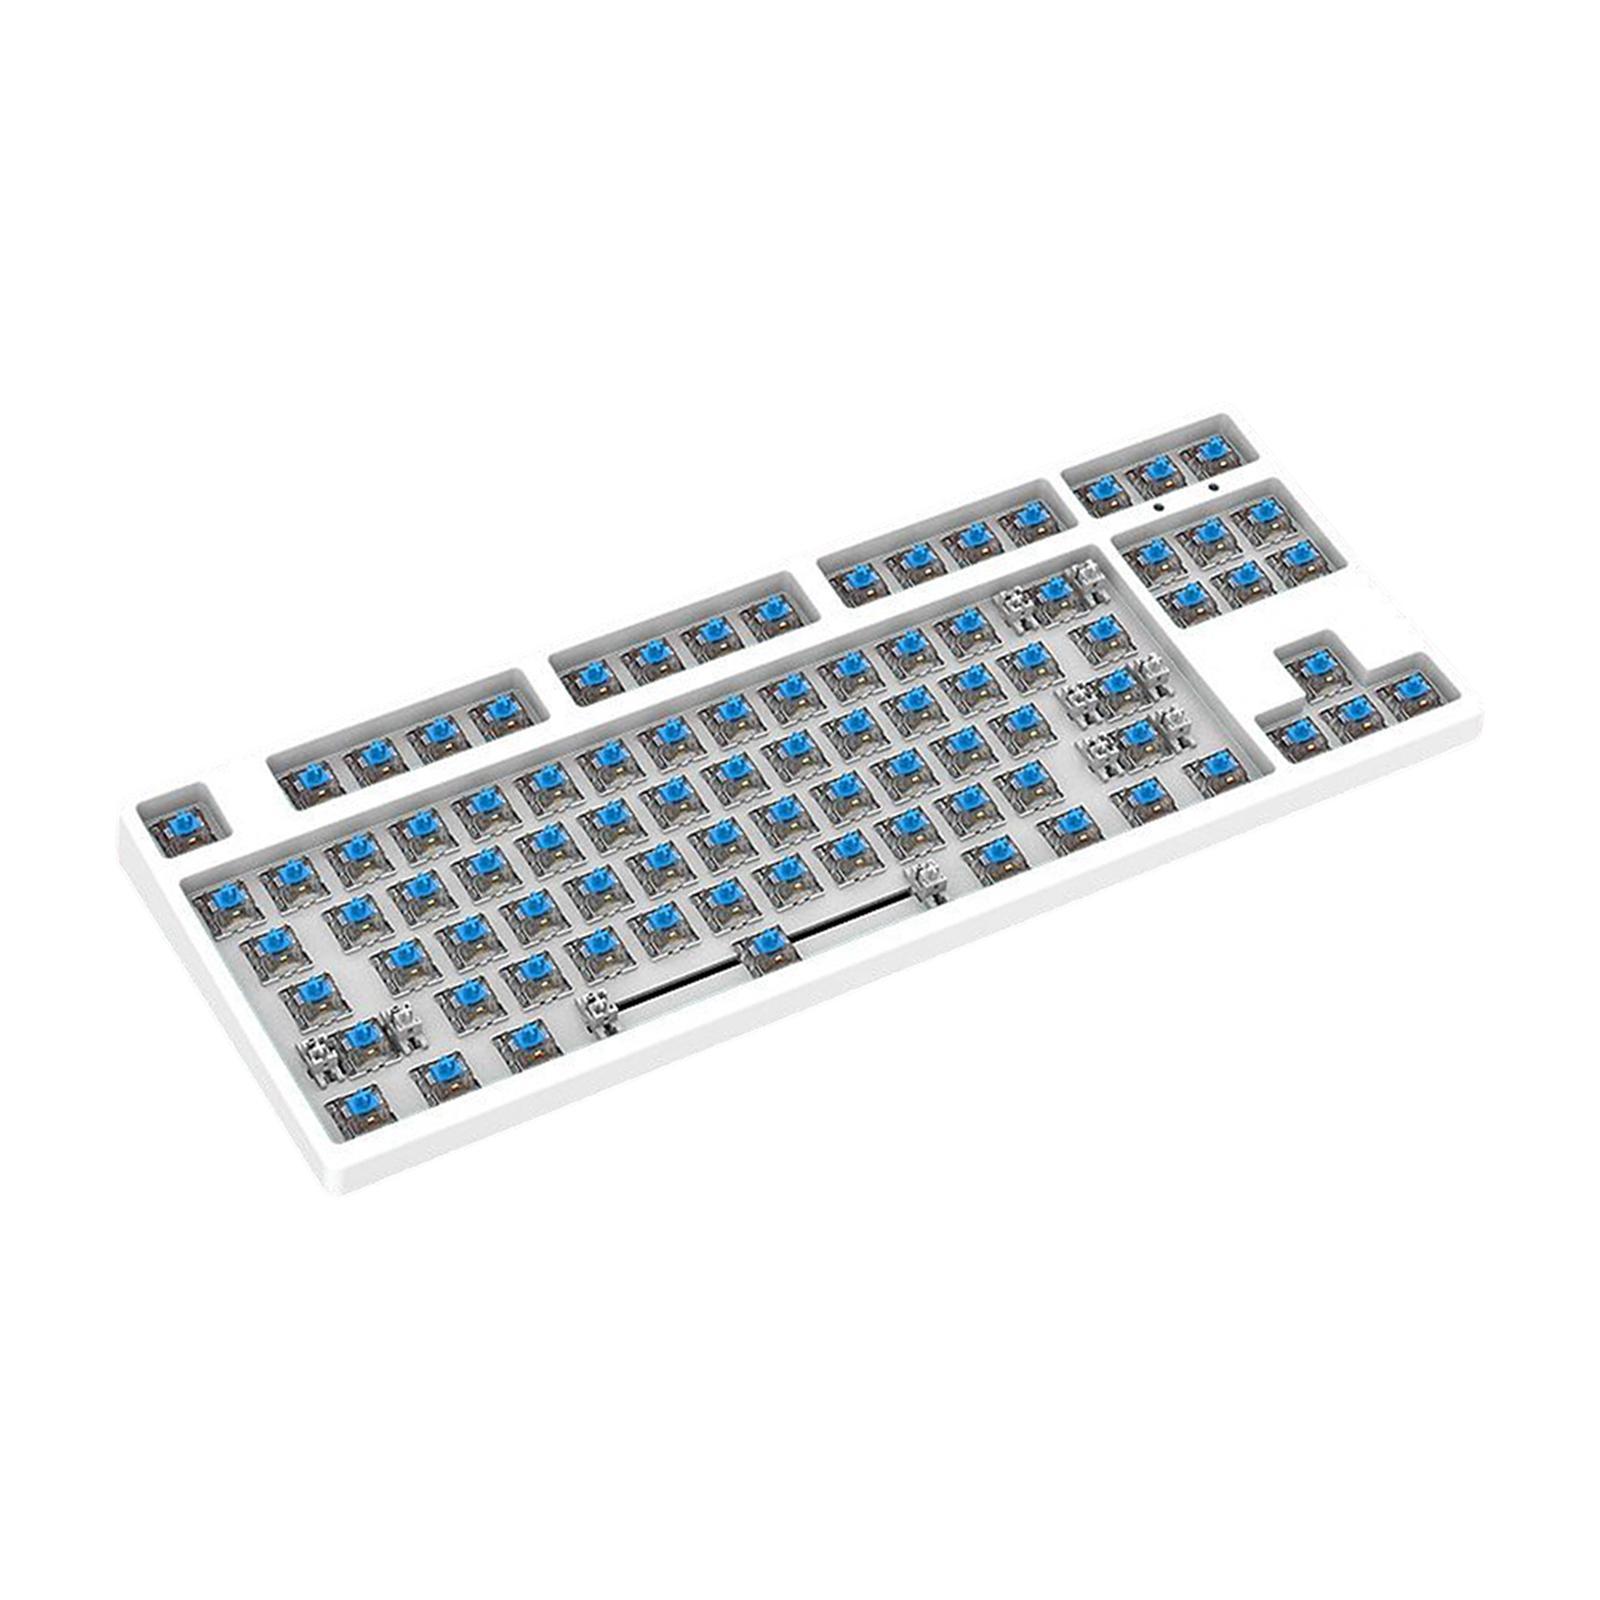 DIY Wired Mechanical Keyboard Kit accessories White